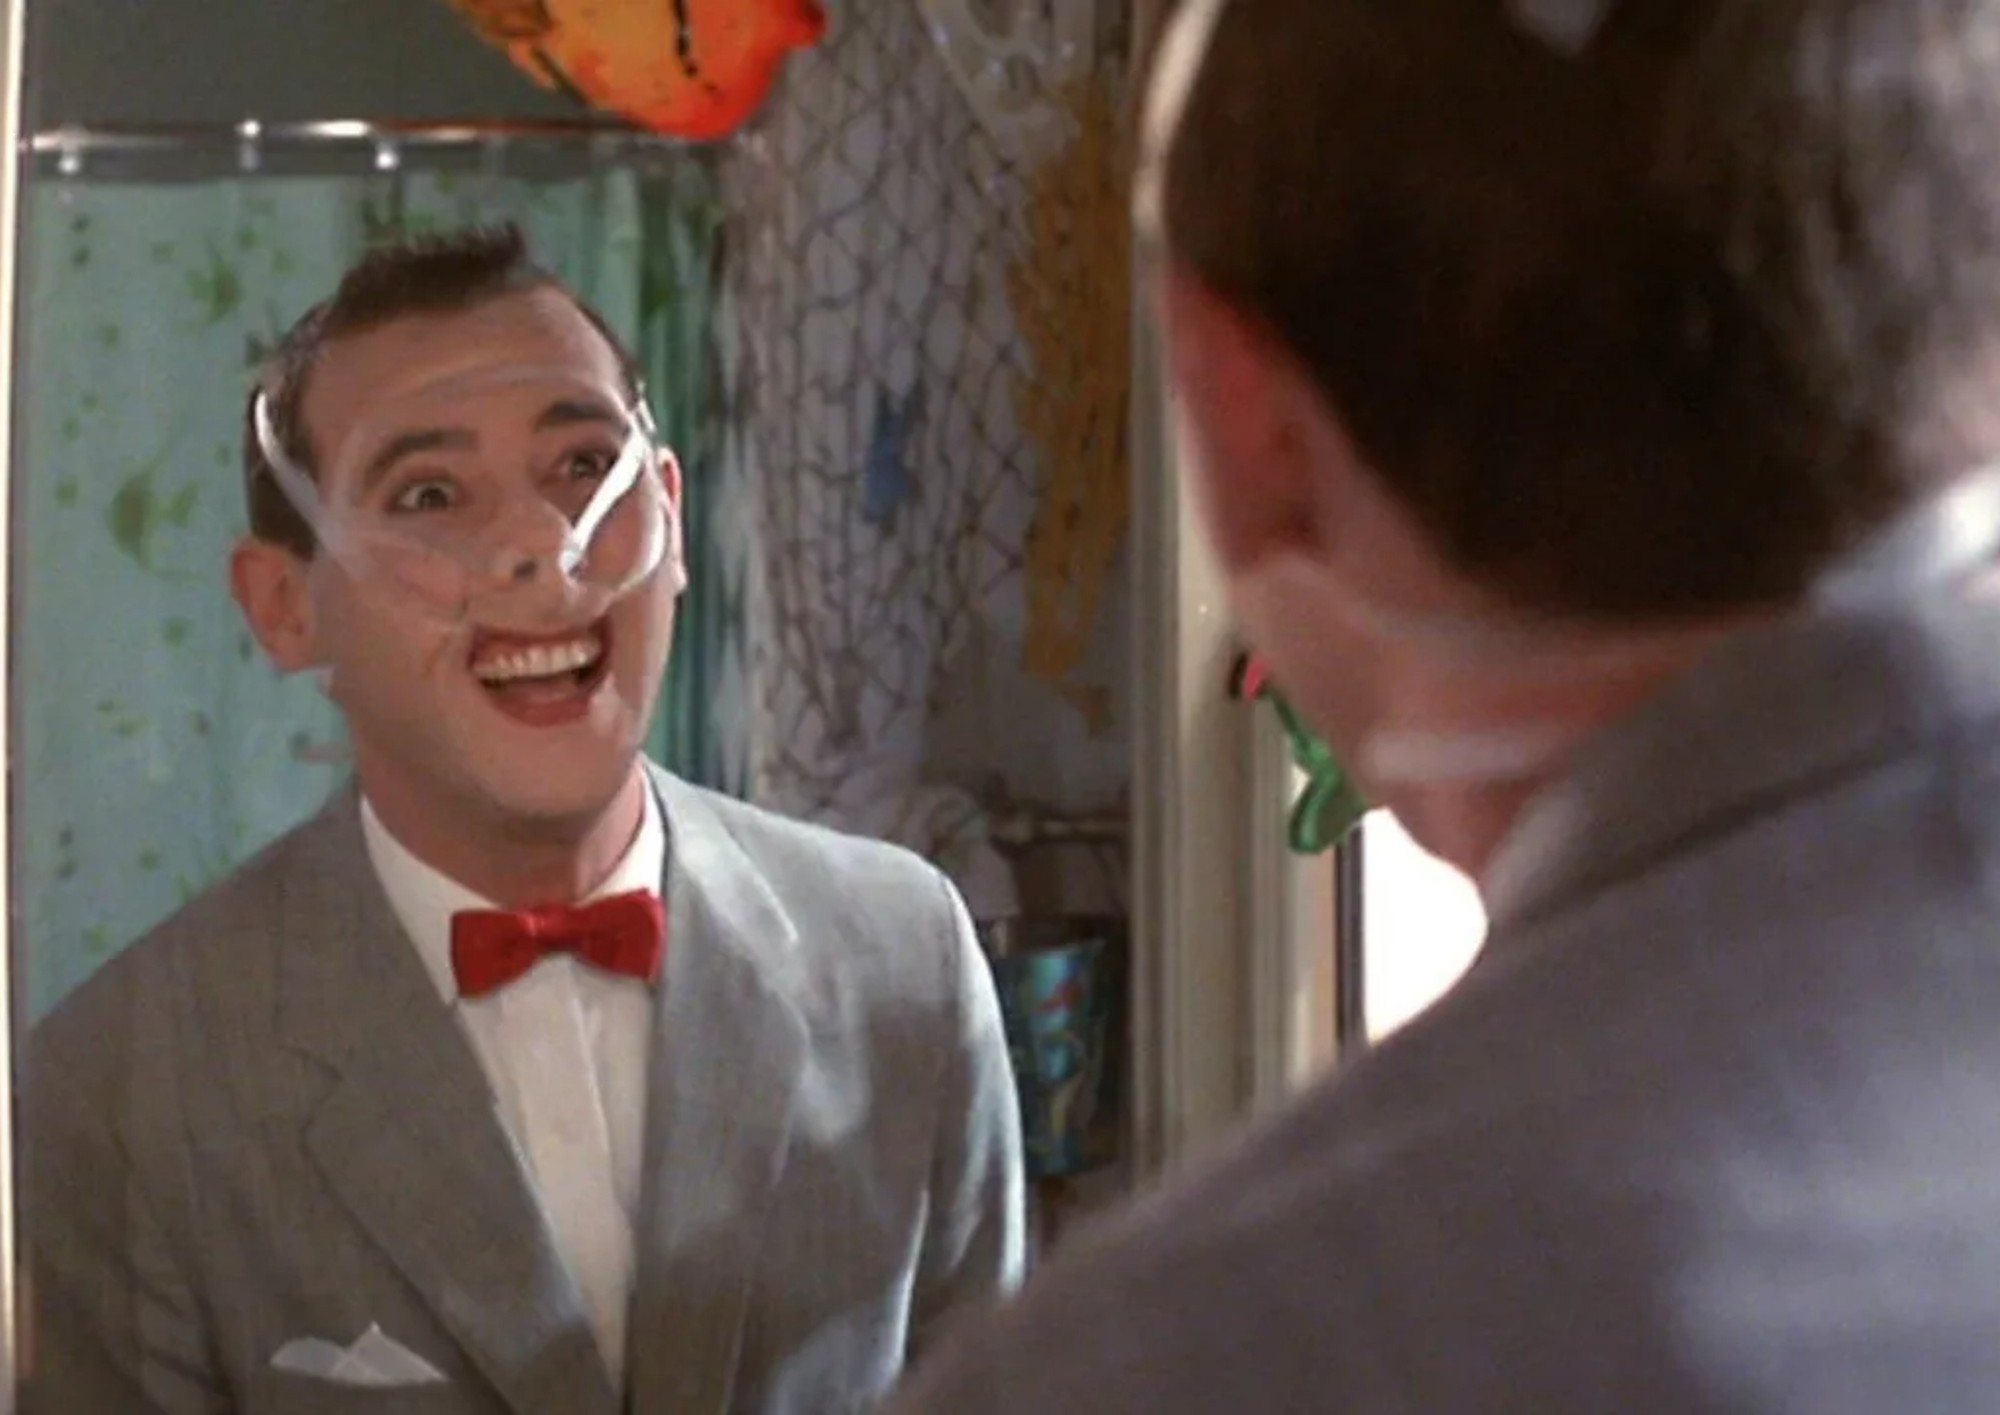 Image from the motion picture Pee-wee's Big Adventure